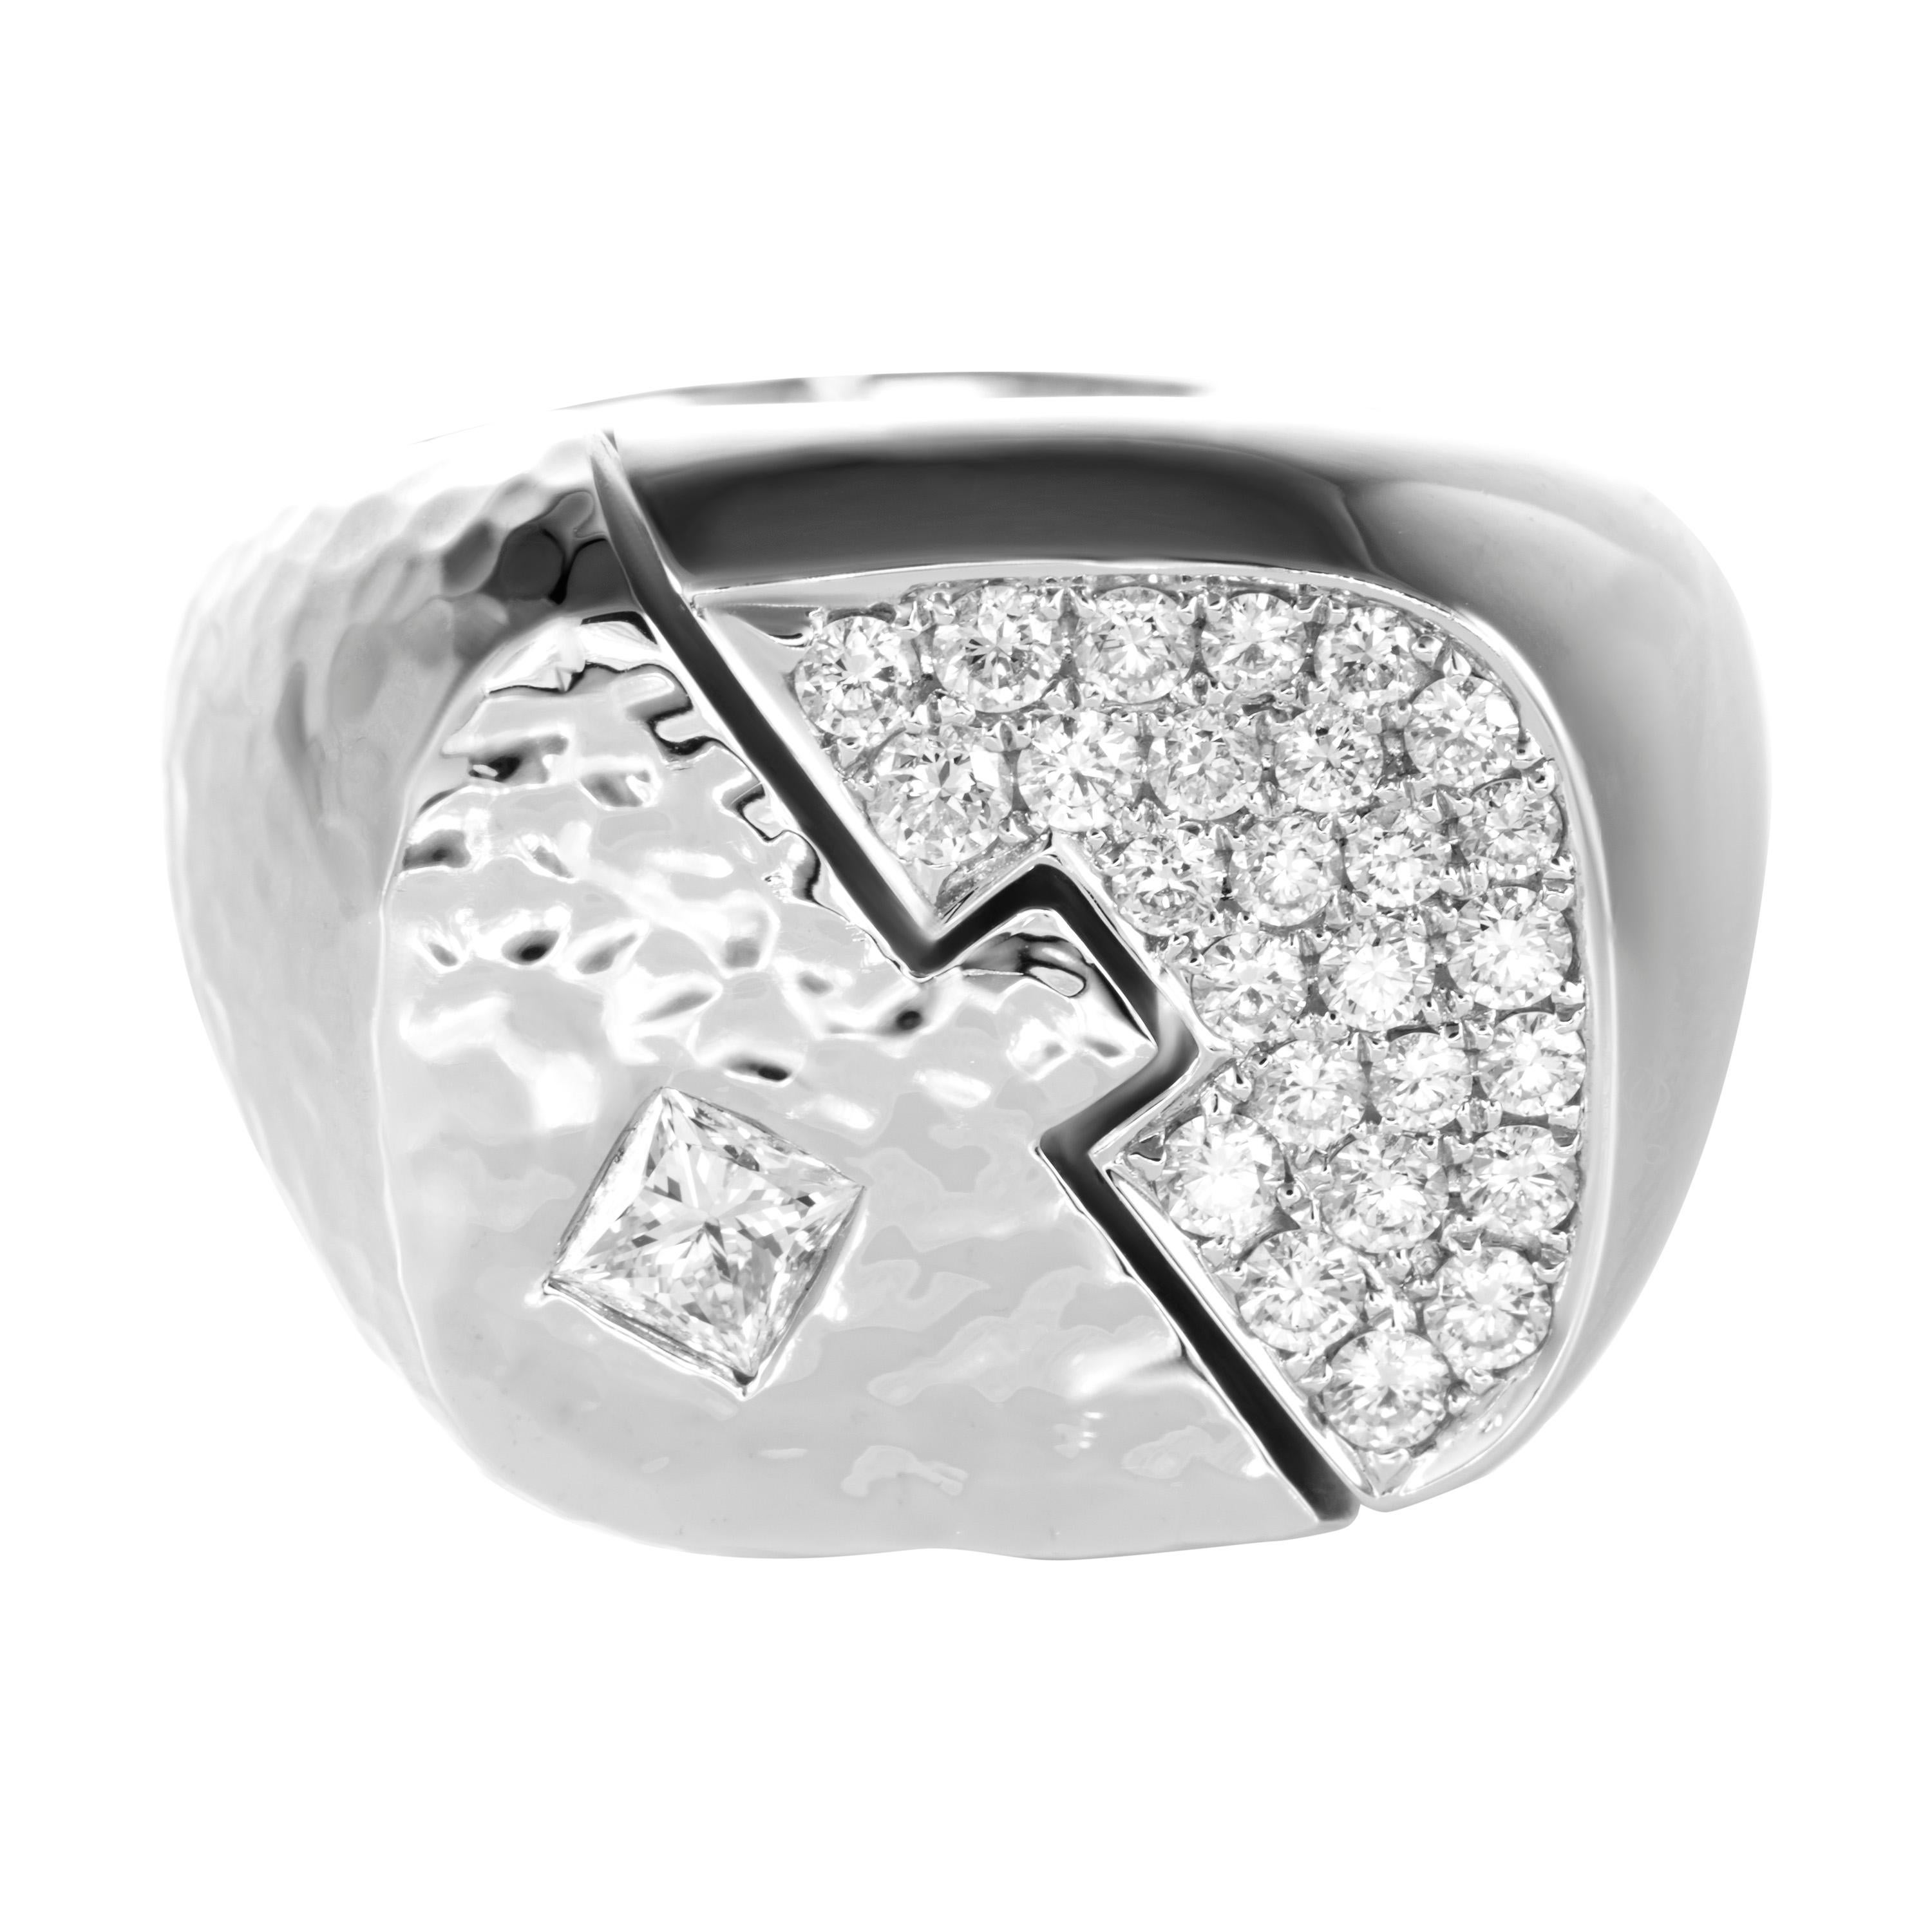 Cast from 18 karat white gold into two intertwining plates, Butani's ring is adorned with 0.60 carats of white diamonds on one side and on hammered 18K gold surrounds a 0.30 carat princess cut diamond on the other side, creating a yin-yang design. 